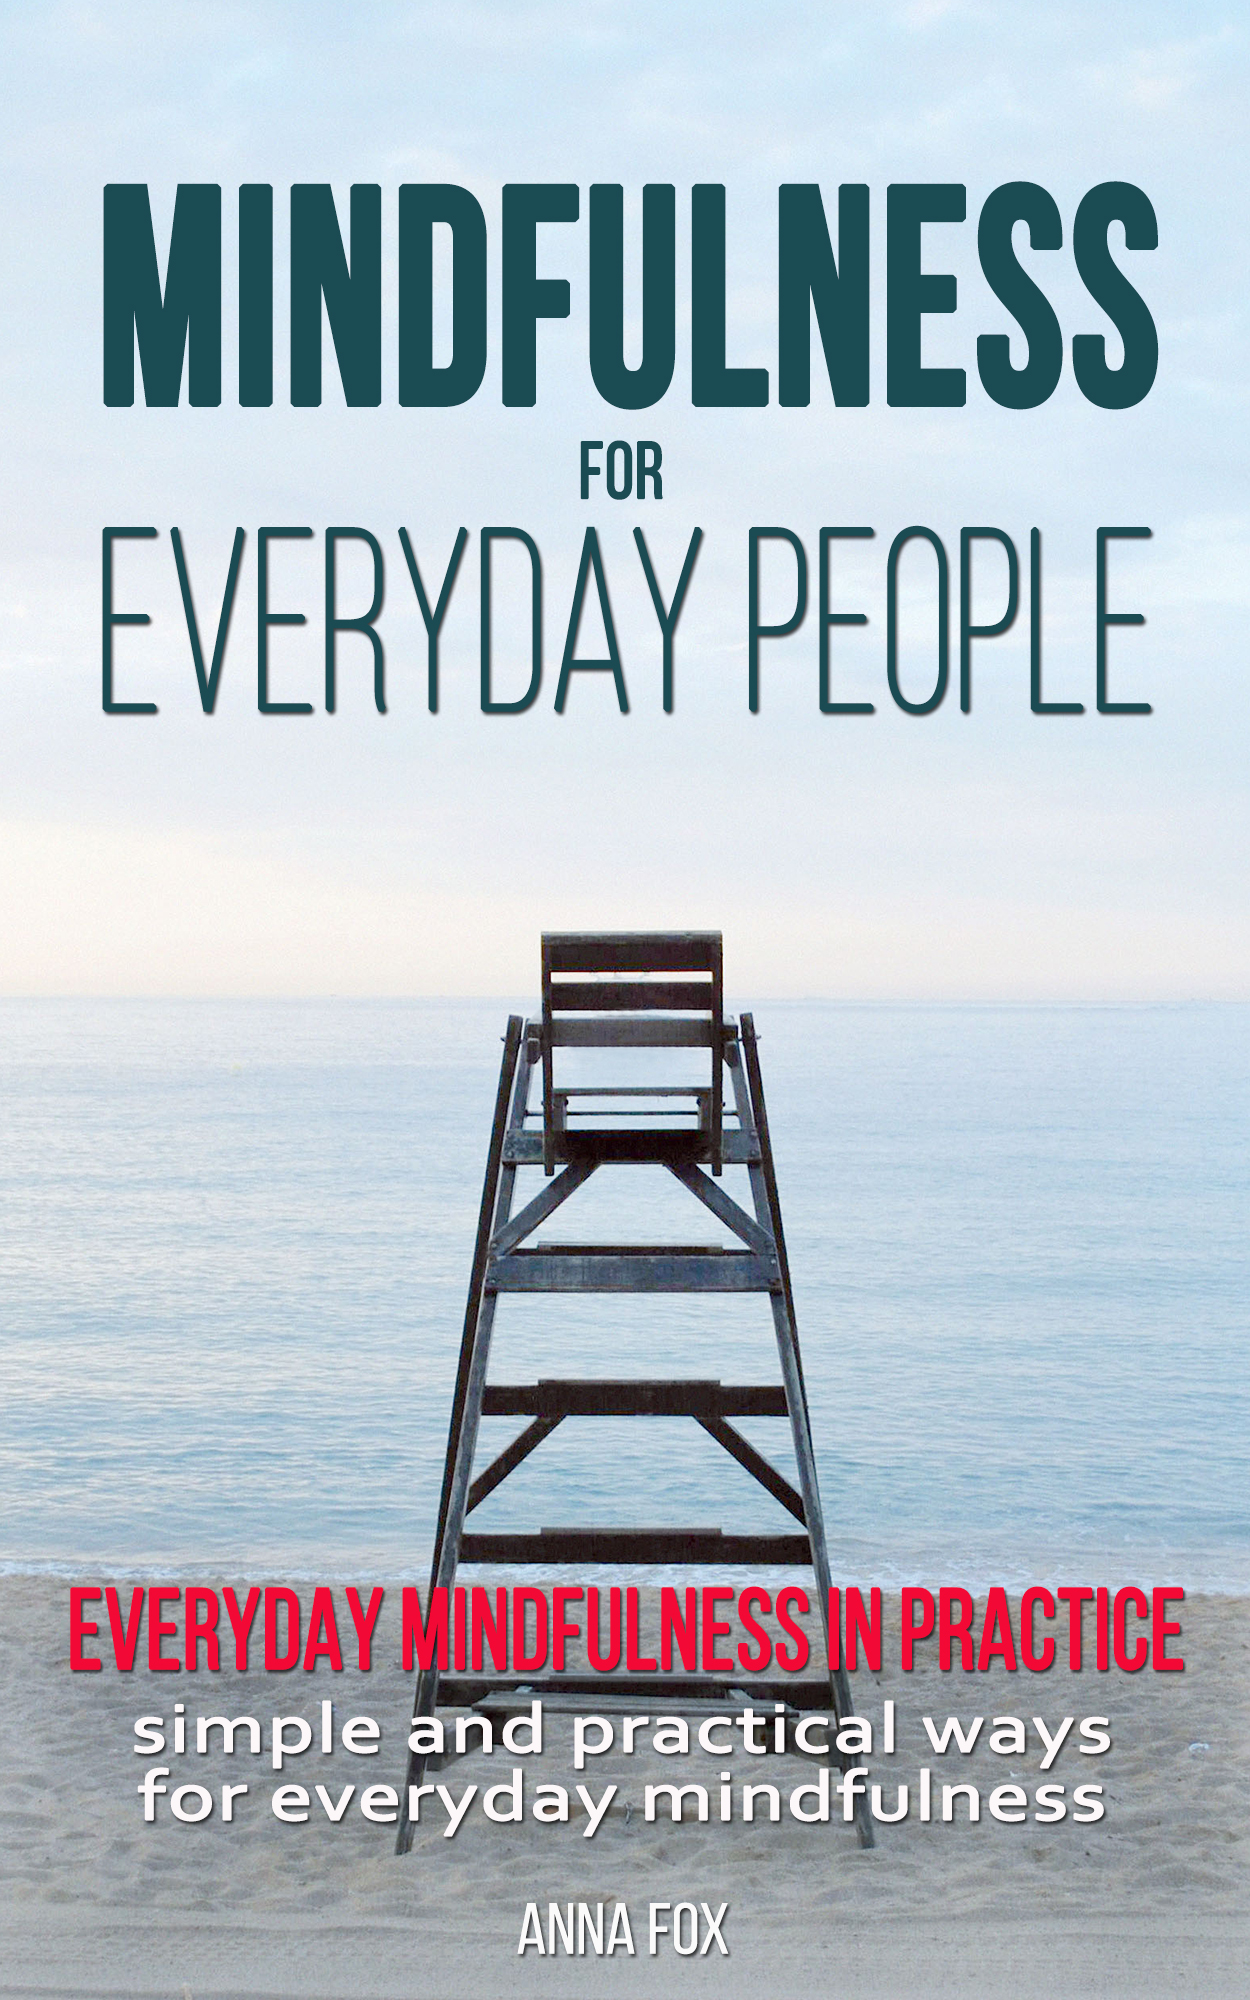 FREE: Mindfulness for everyday people: EVERYDAY MINDFULNESS IN PRACTICE – Simple and practical ways for everyday mindfulness by Anna Fox